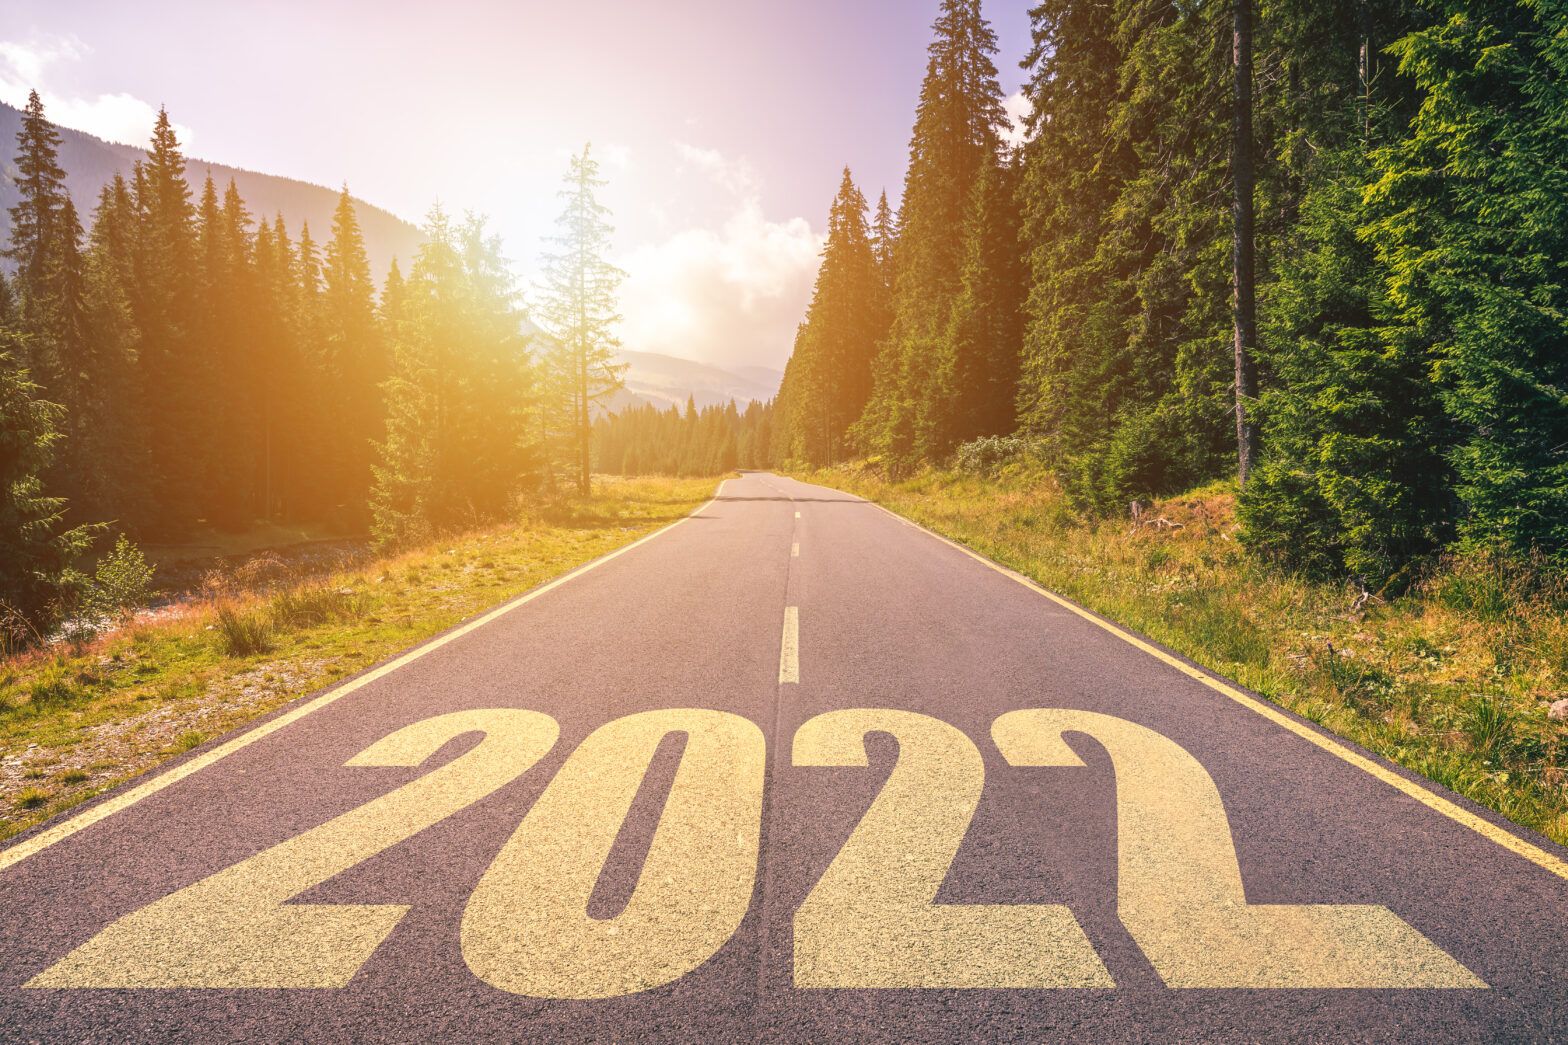 ESG themes taking on new life in 2022